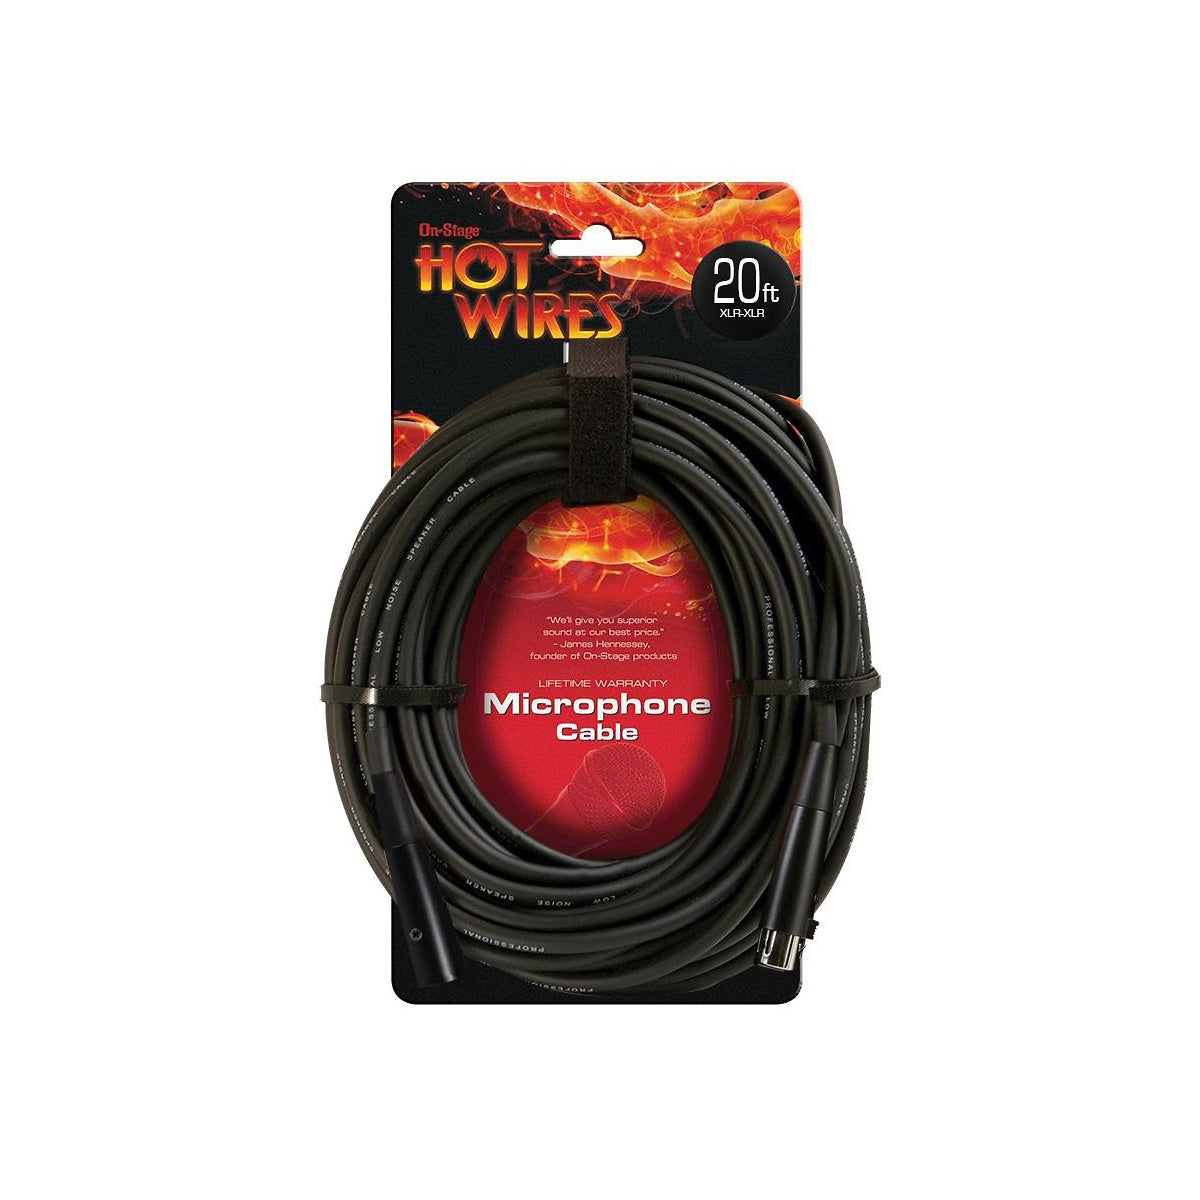 Hot Wires Microphone Cable, 20 Foot